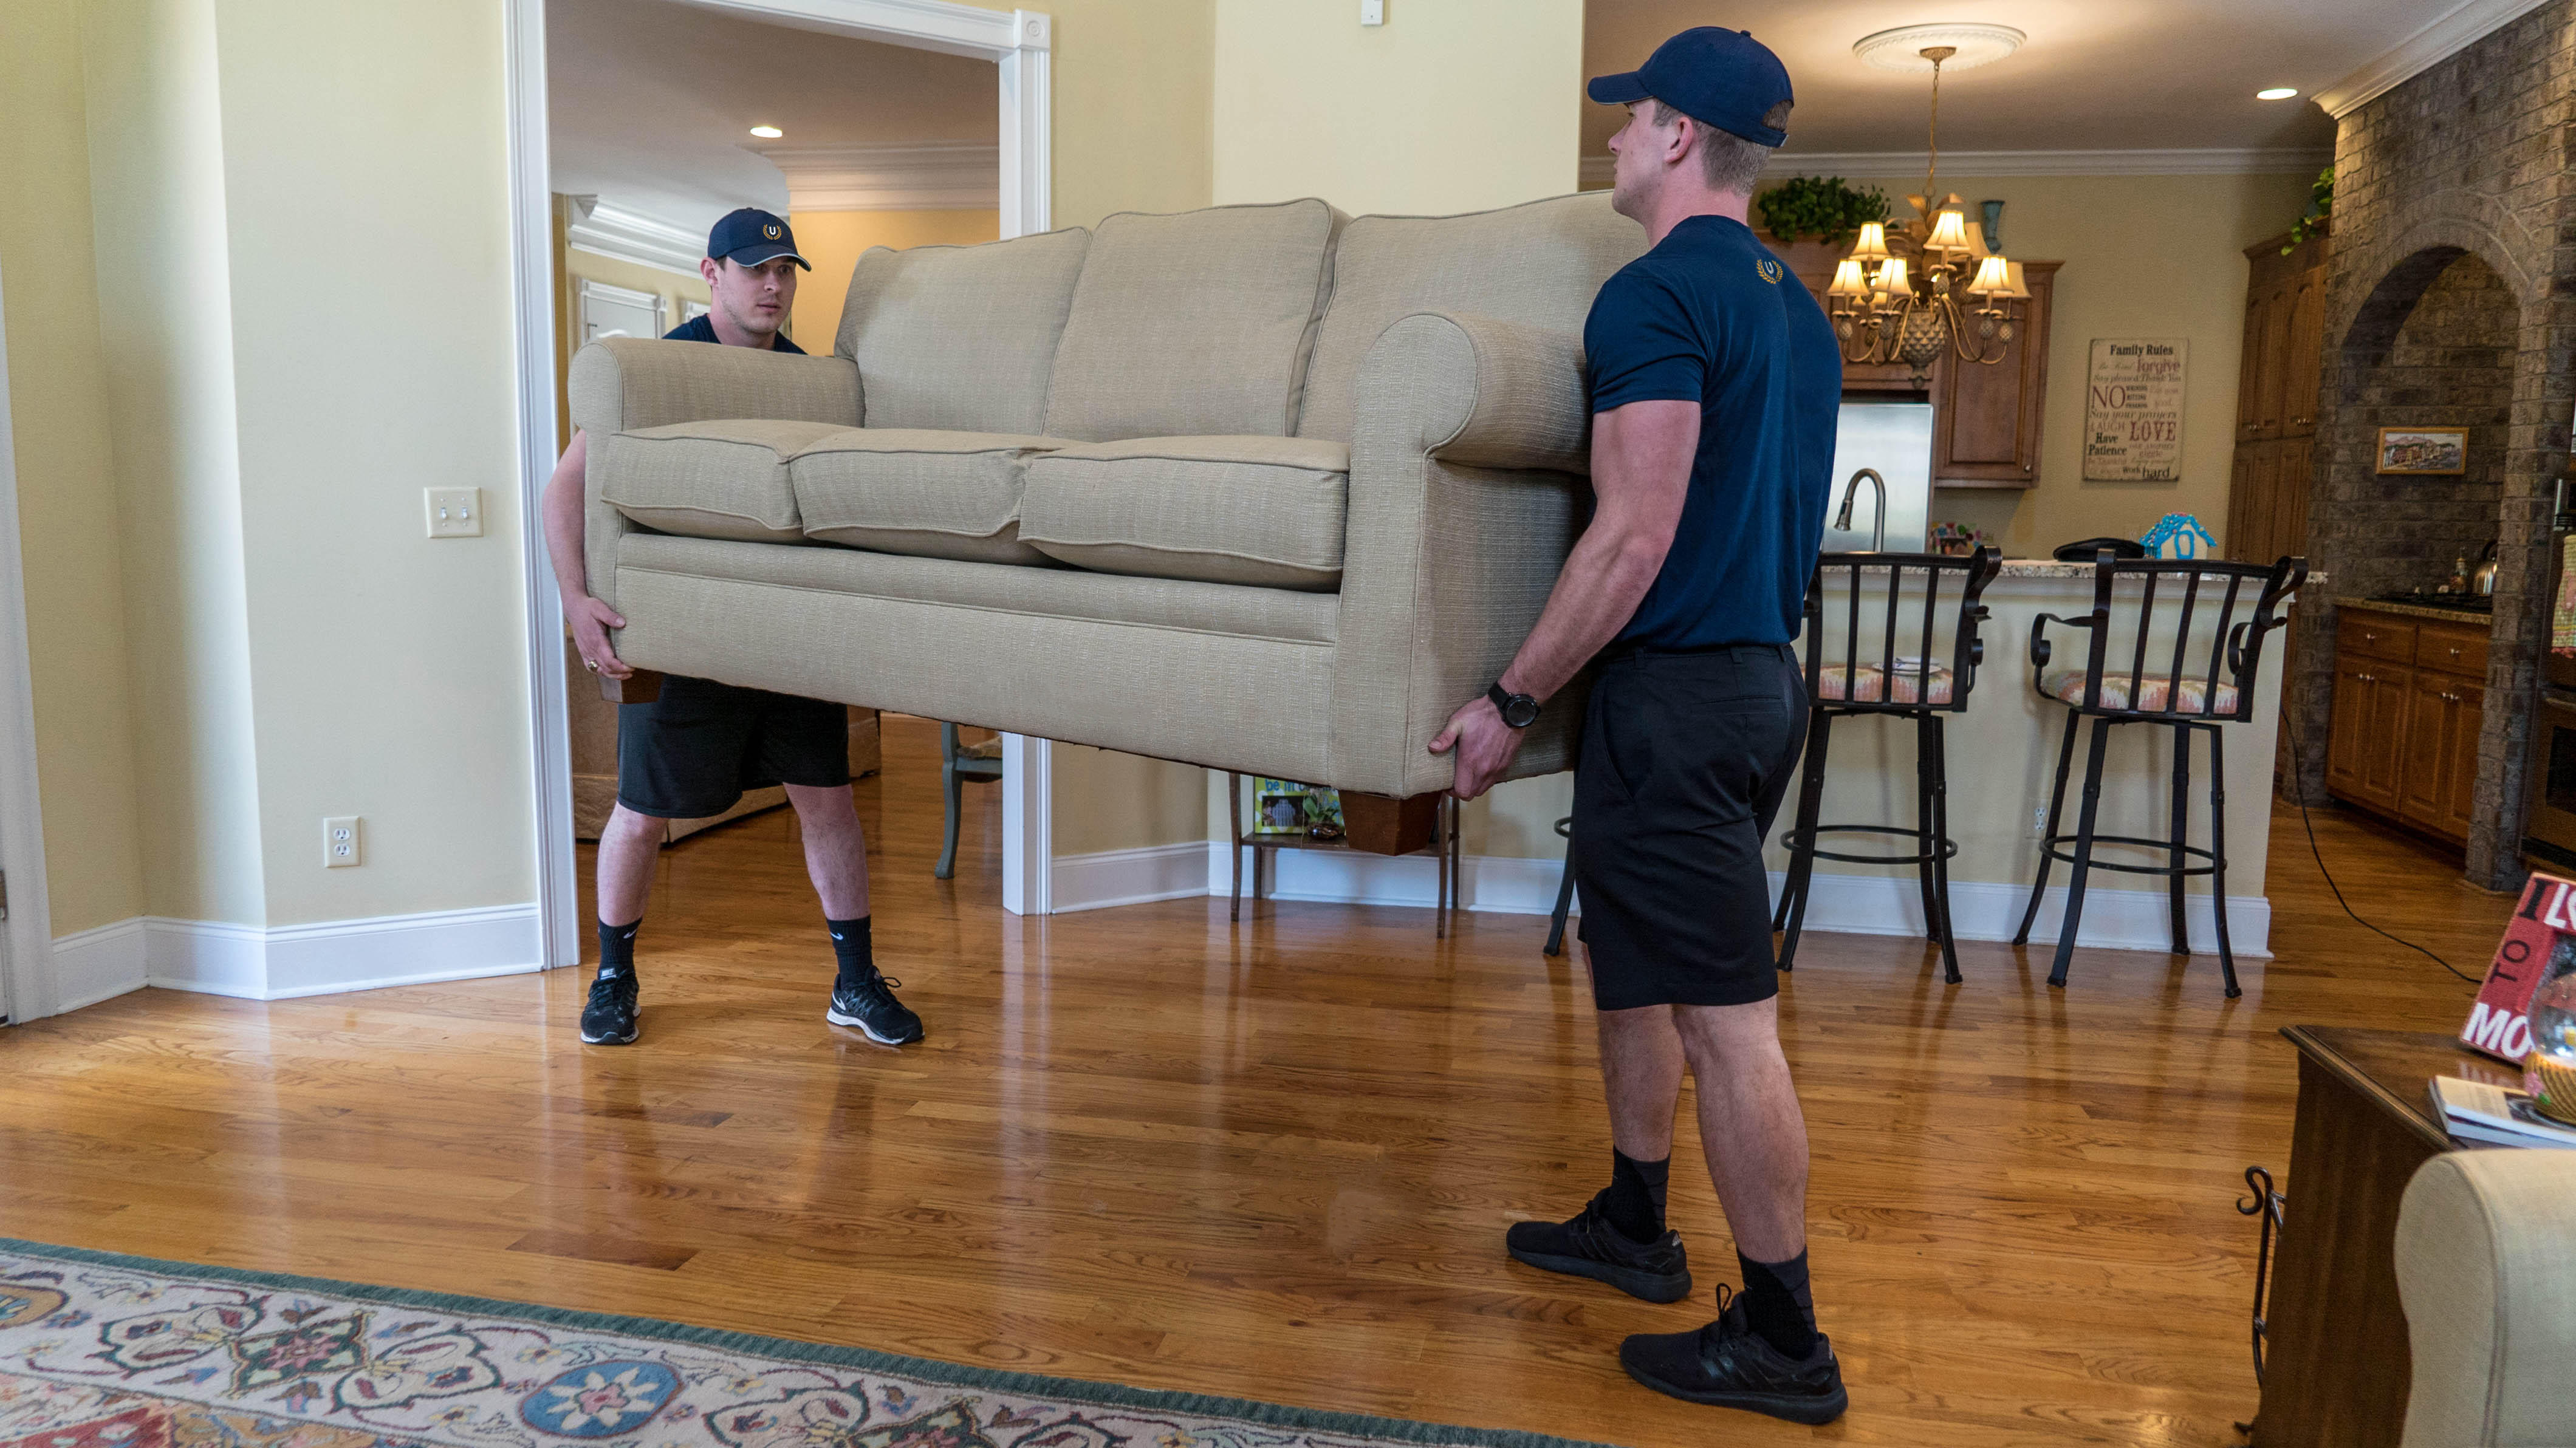 Undergrads Moving | Movers Charlotte NC Photo